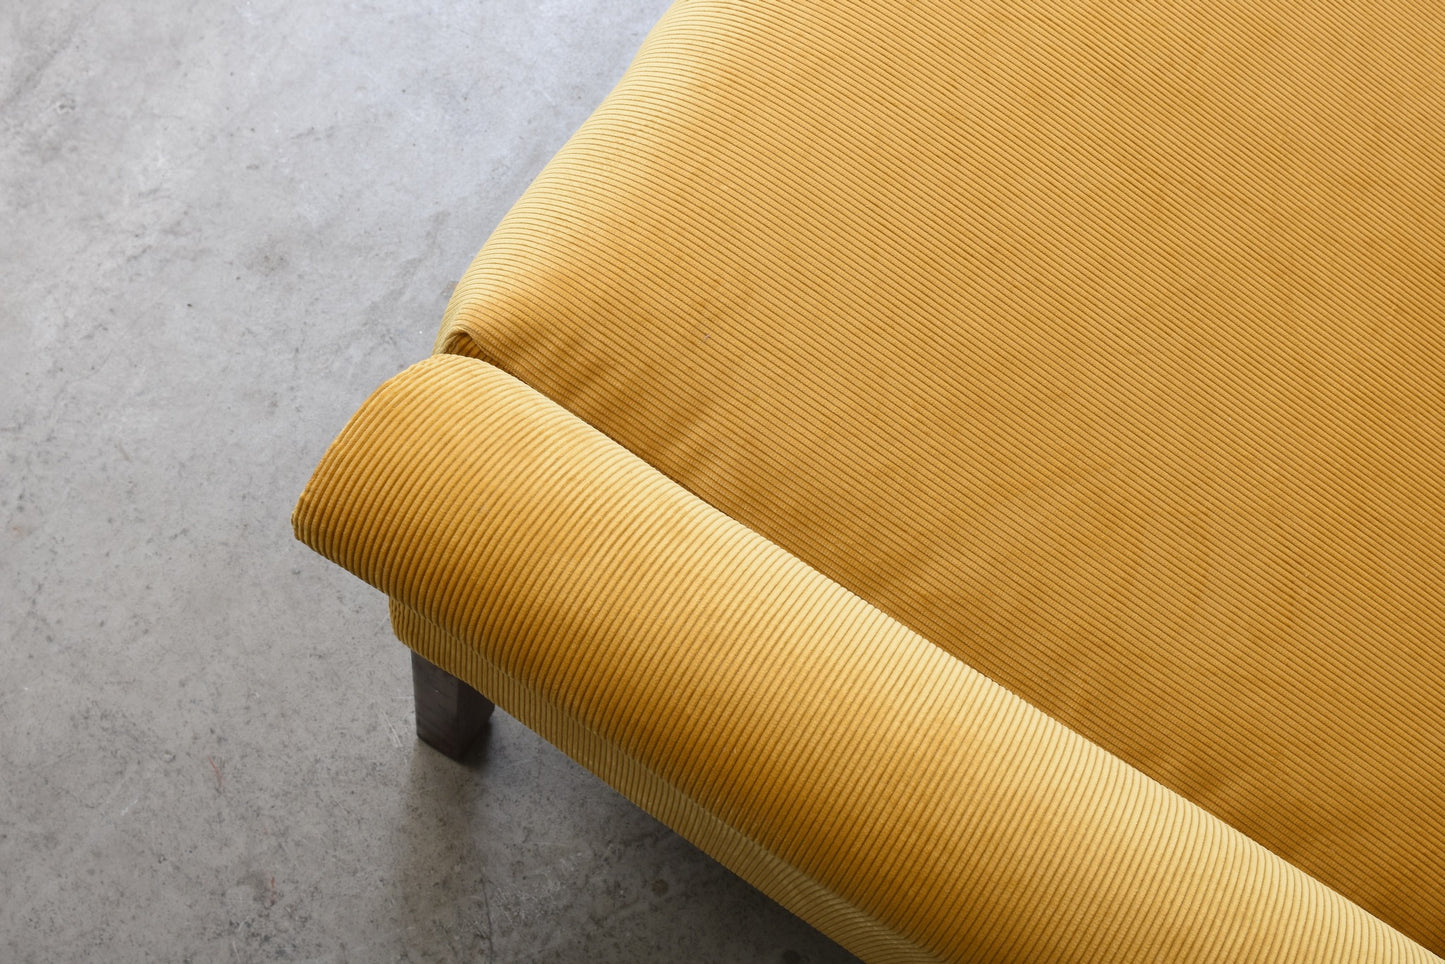 Newly upholstered: 1960s lounger in corduroy